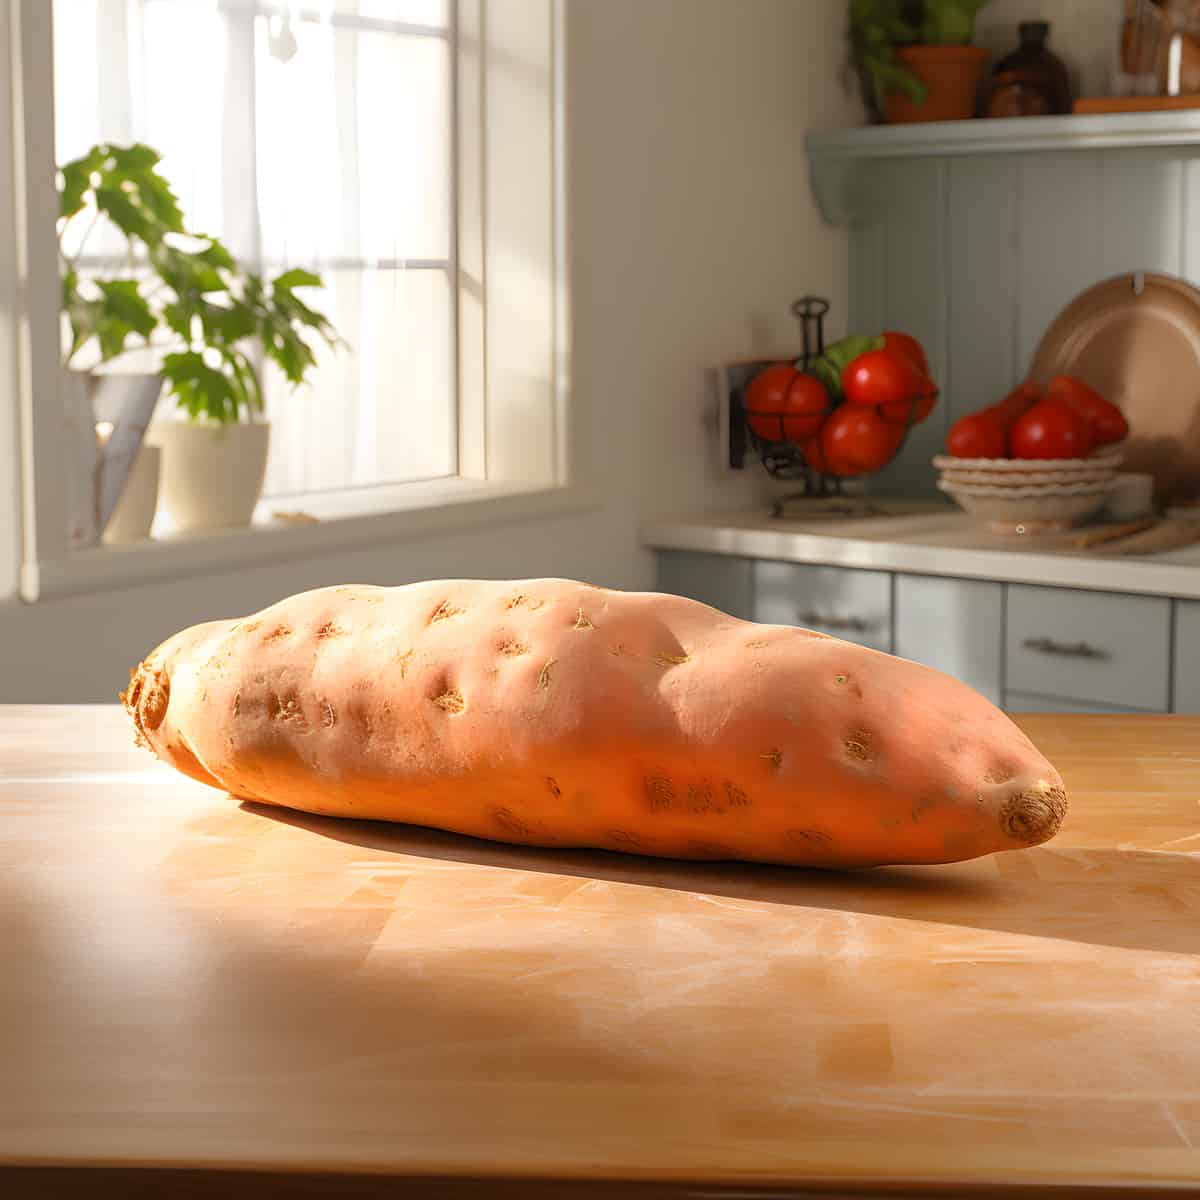 Hidry Sweet Potatoes on a kitchen counter